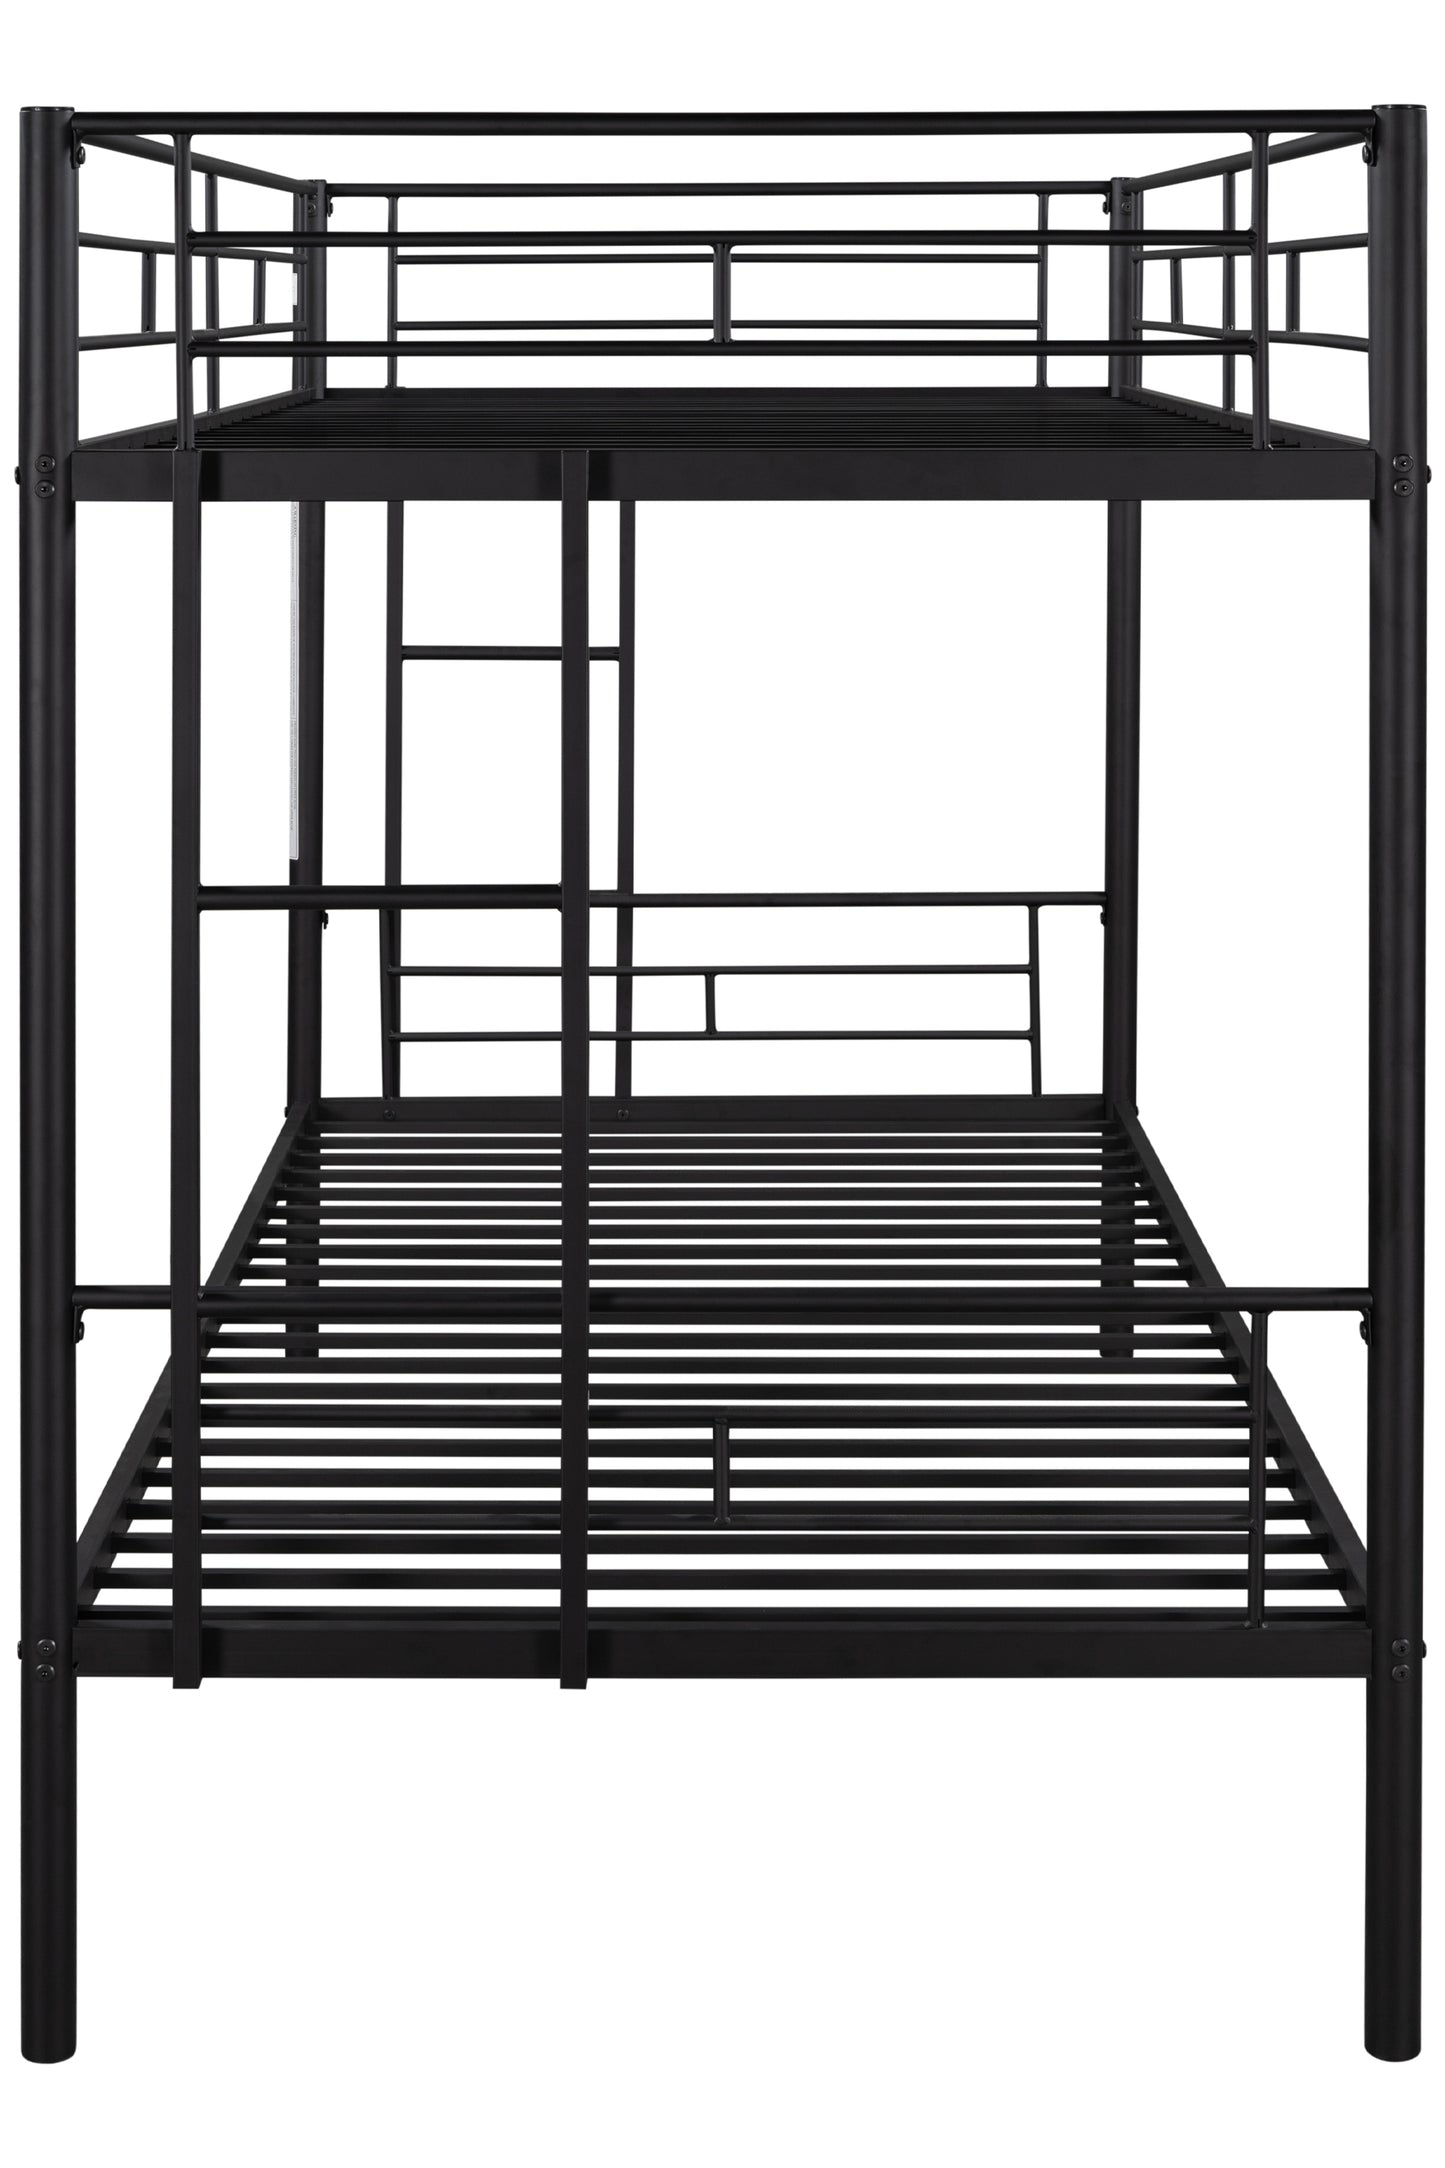 Twin Over Twin Bunk Beds for Kids Teens Adults, PENTIUM Heavy Duty Twin Over Twin Metal Bunk Bed, Twin Bunk Bed with Guardrails, 2 Side Ladders, Modern Twin Bunk Bed Frame for Bedroom, Black